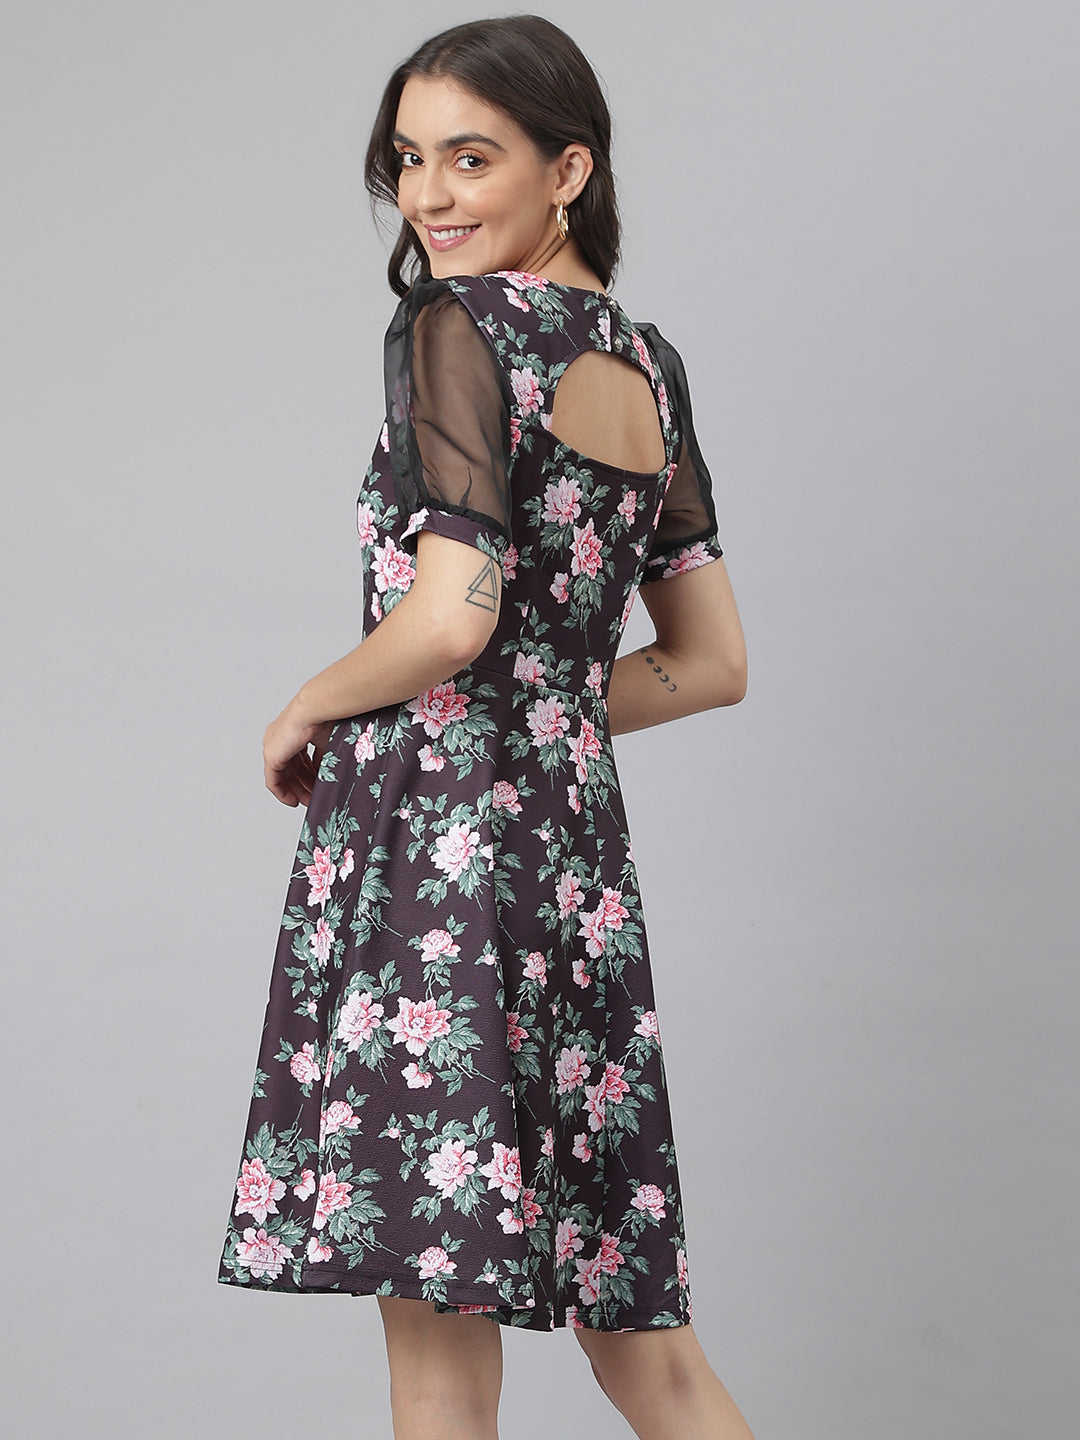 99422 - Black Poly Blend Lycra Fabric Floral Printed Dress With Organza Sleeves